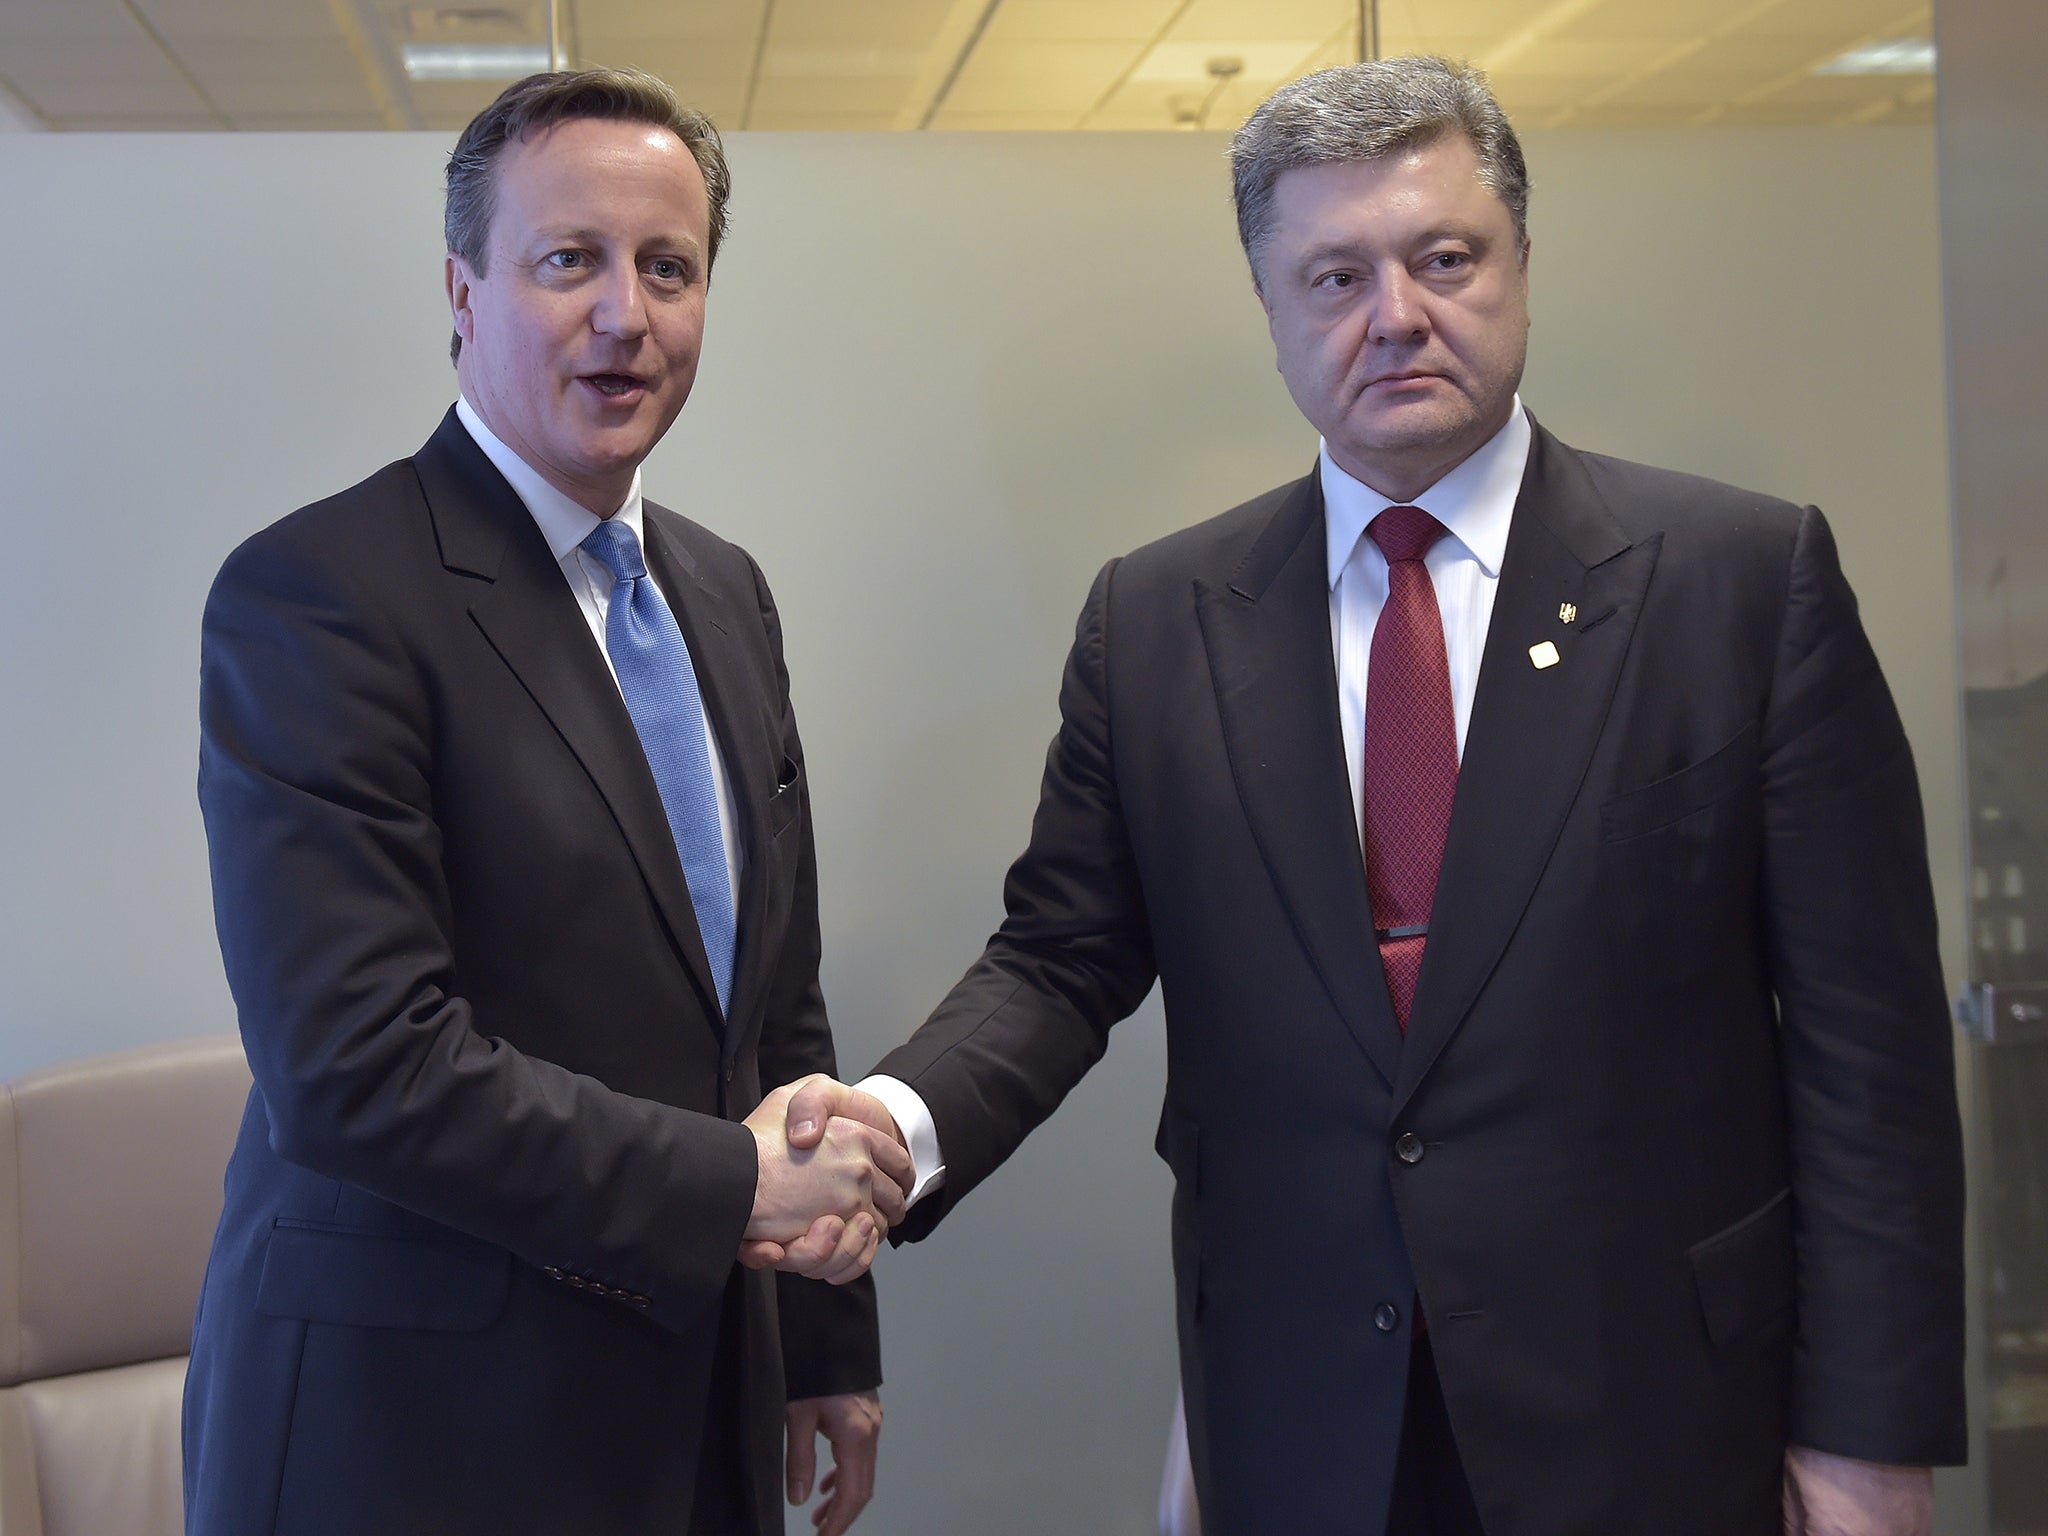 David Cameron met with Ukrainian President Petro Poroshenko prior to the start of the European Council Summit in Brussels last month